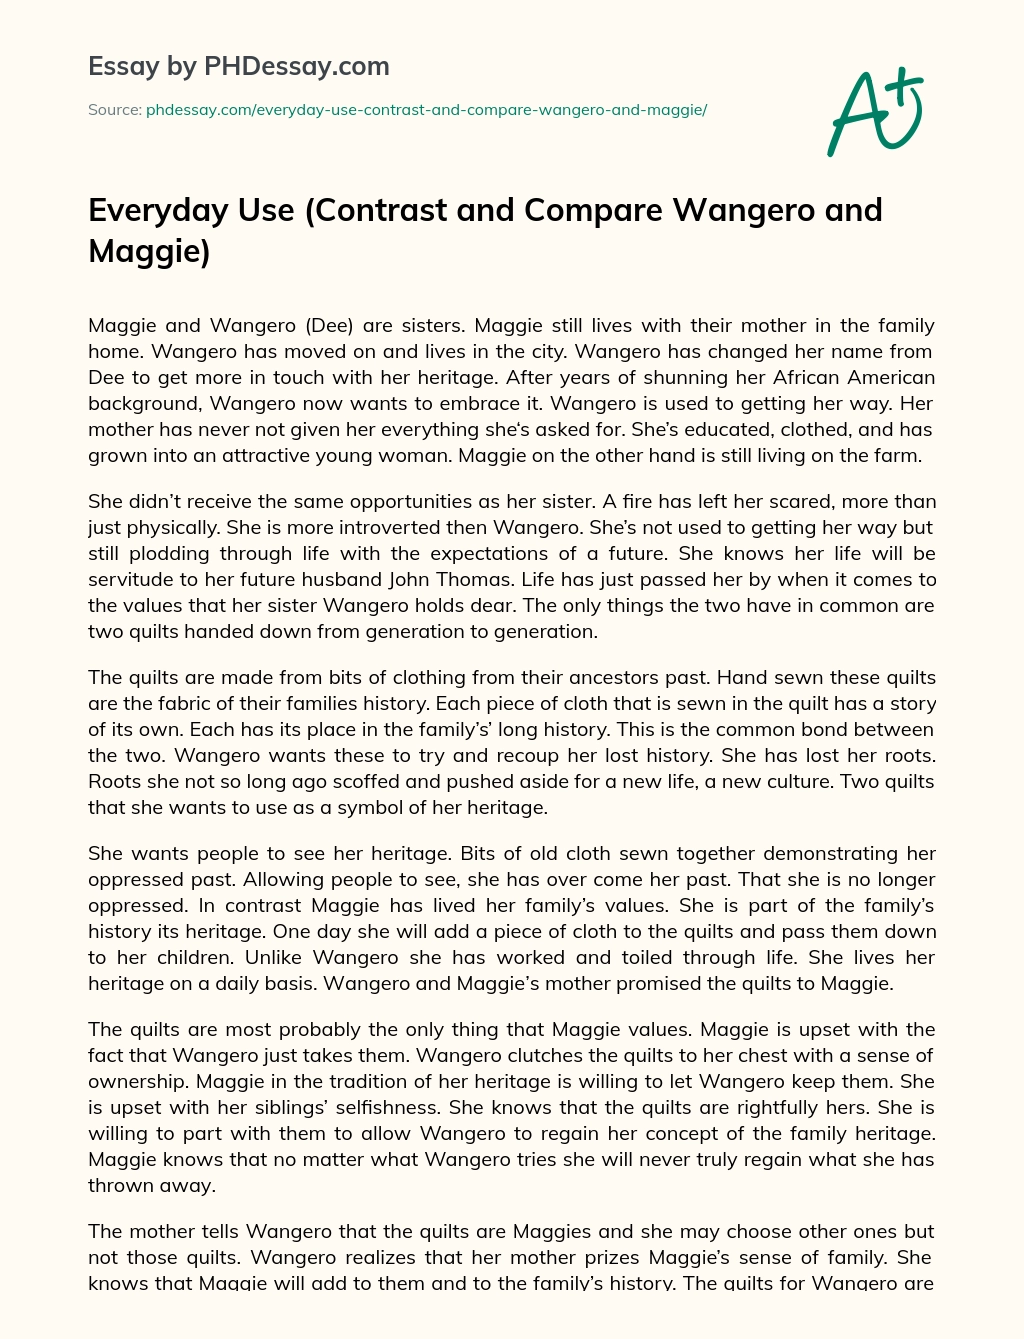 Everyday Use (Contrast and Compare Wangero and Maggie) essay